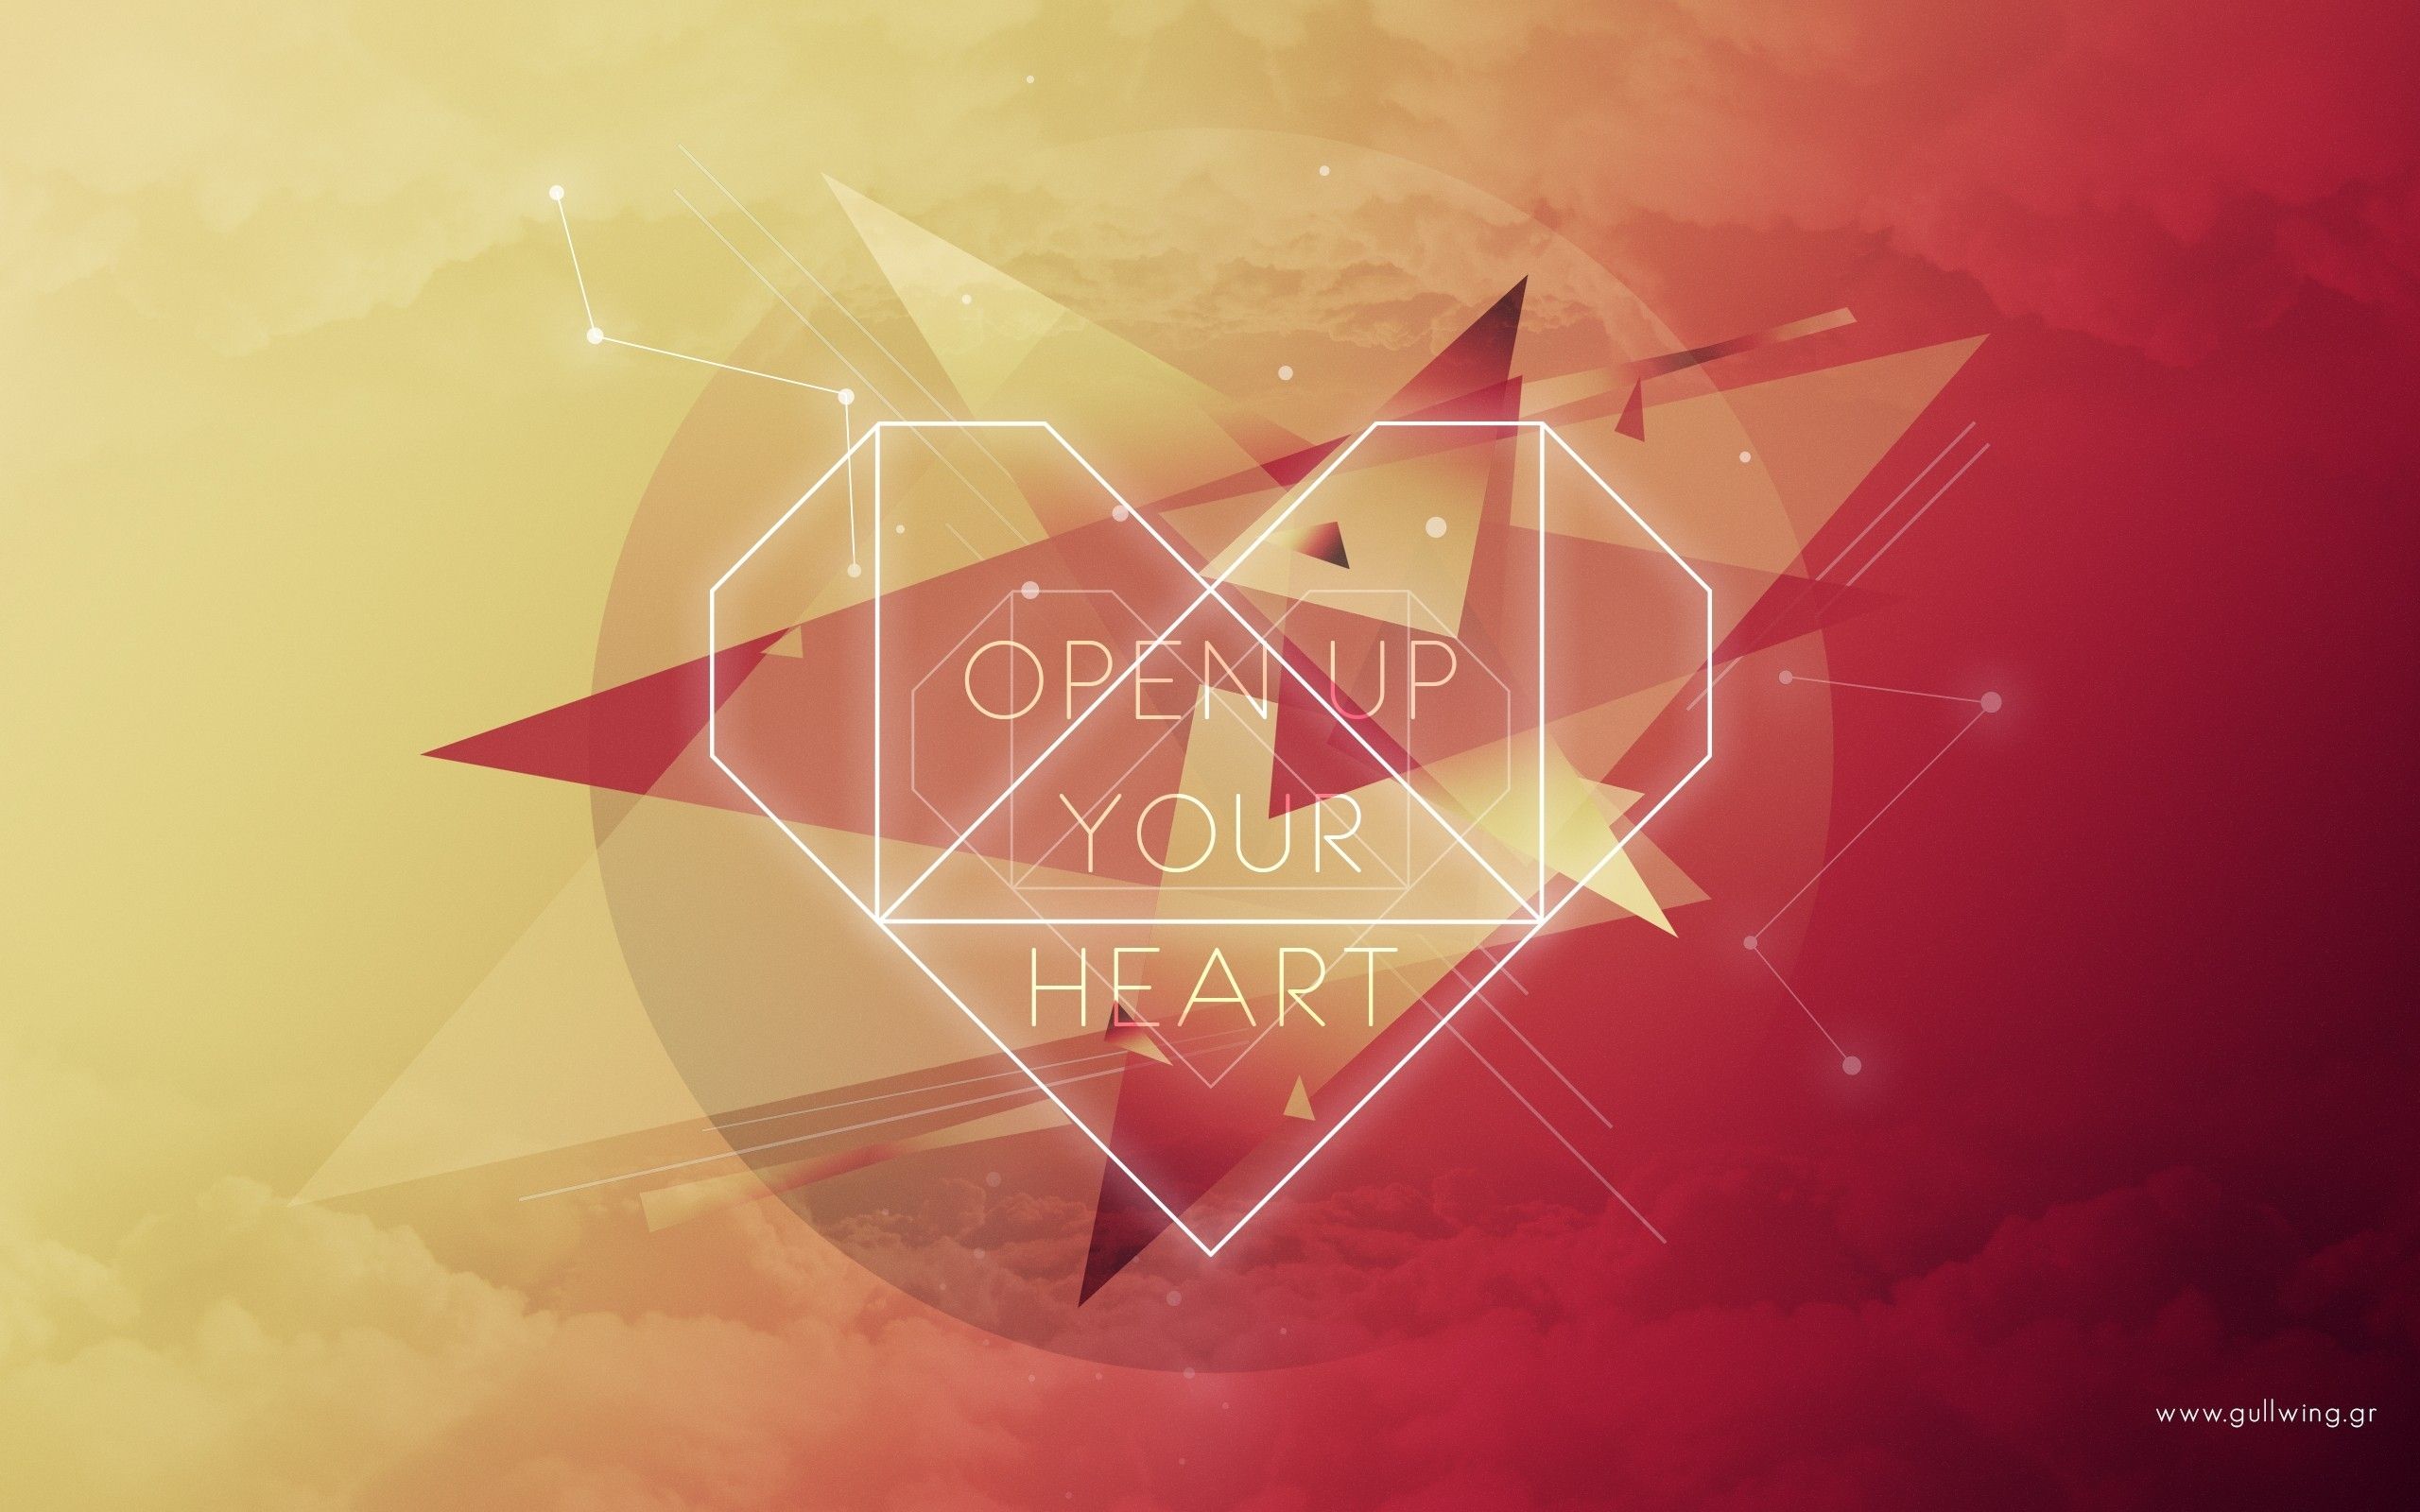 Open Up Your Heart Abstract wallpaper. Open Up Your Heart